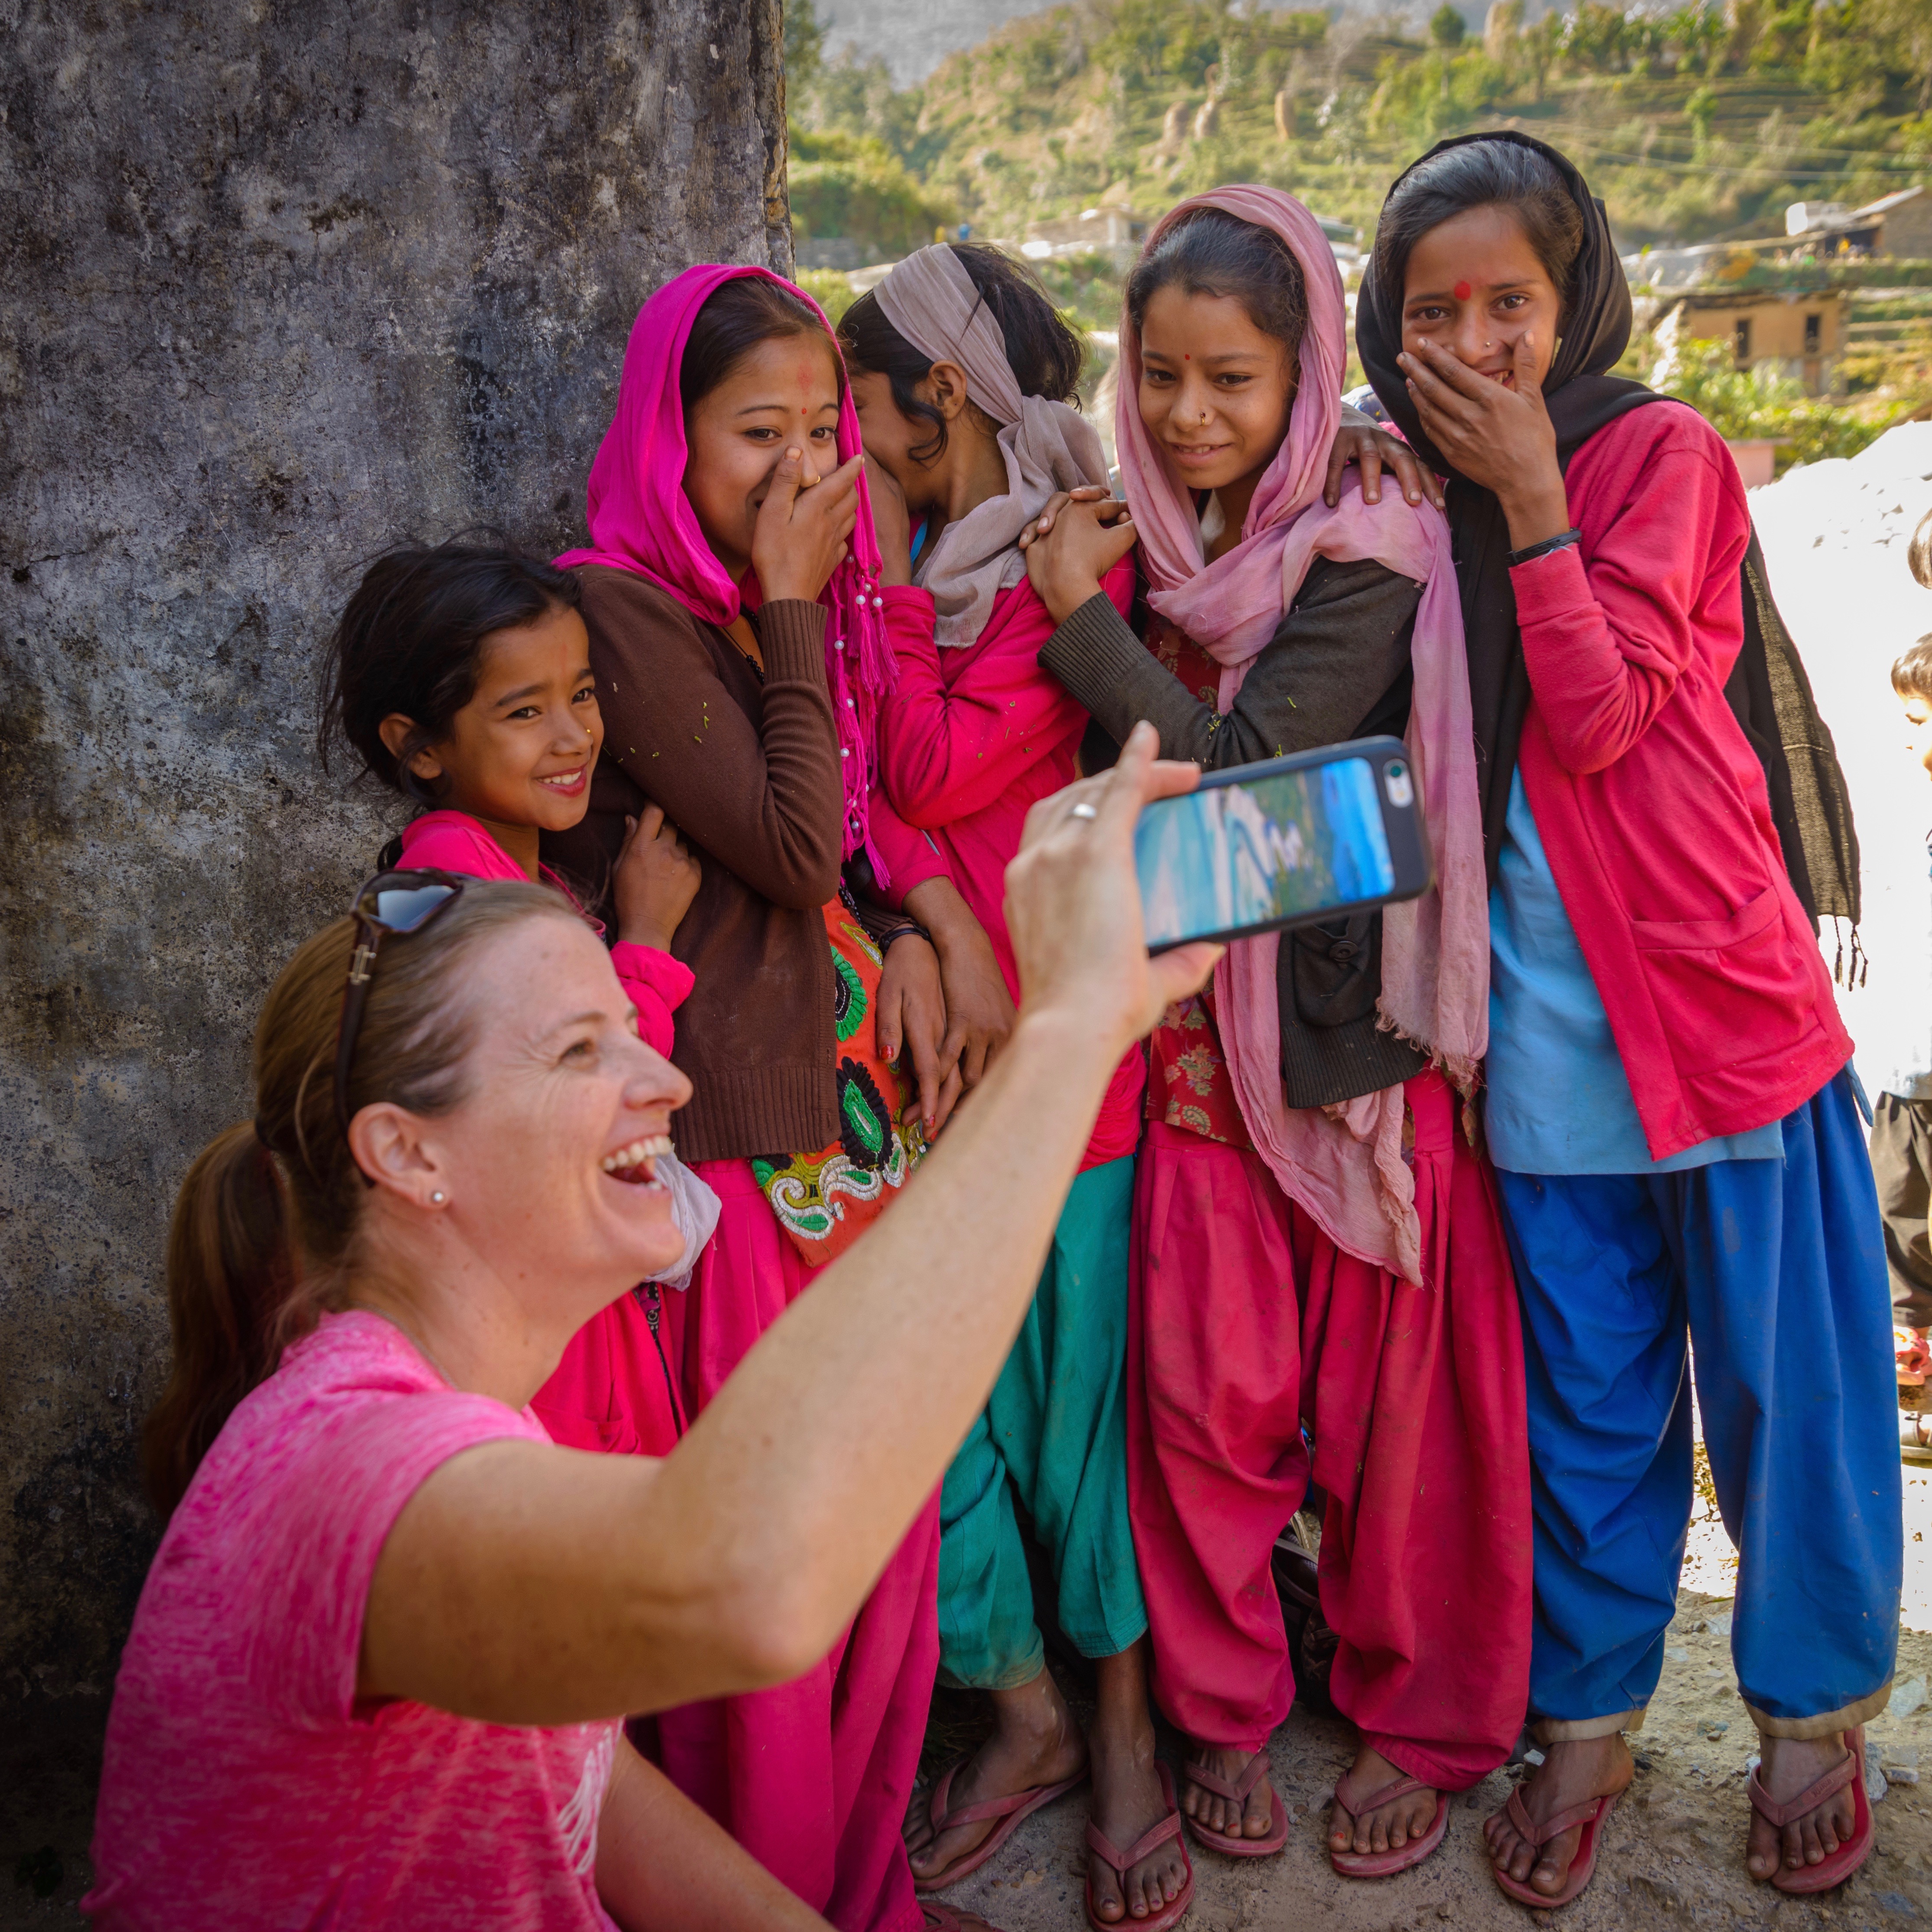 Woman taking a selfie with Indian girls